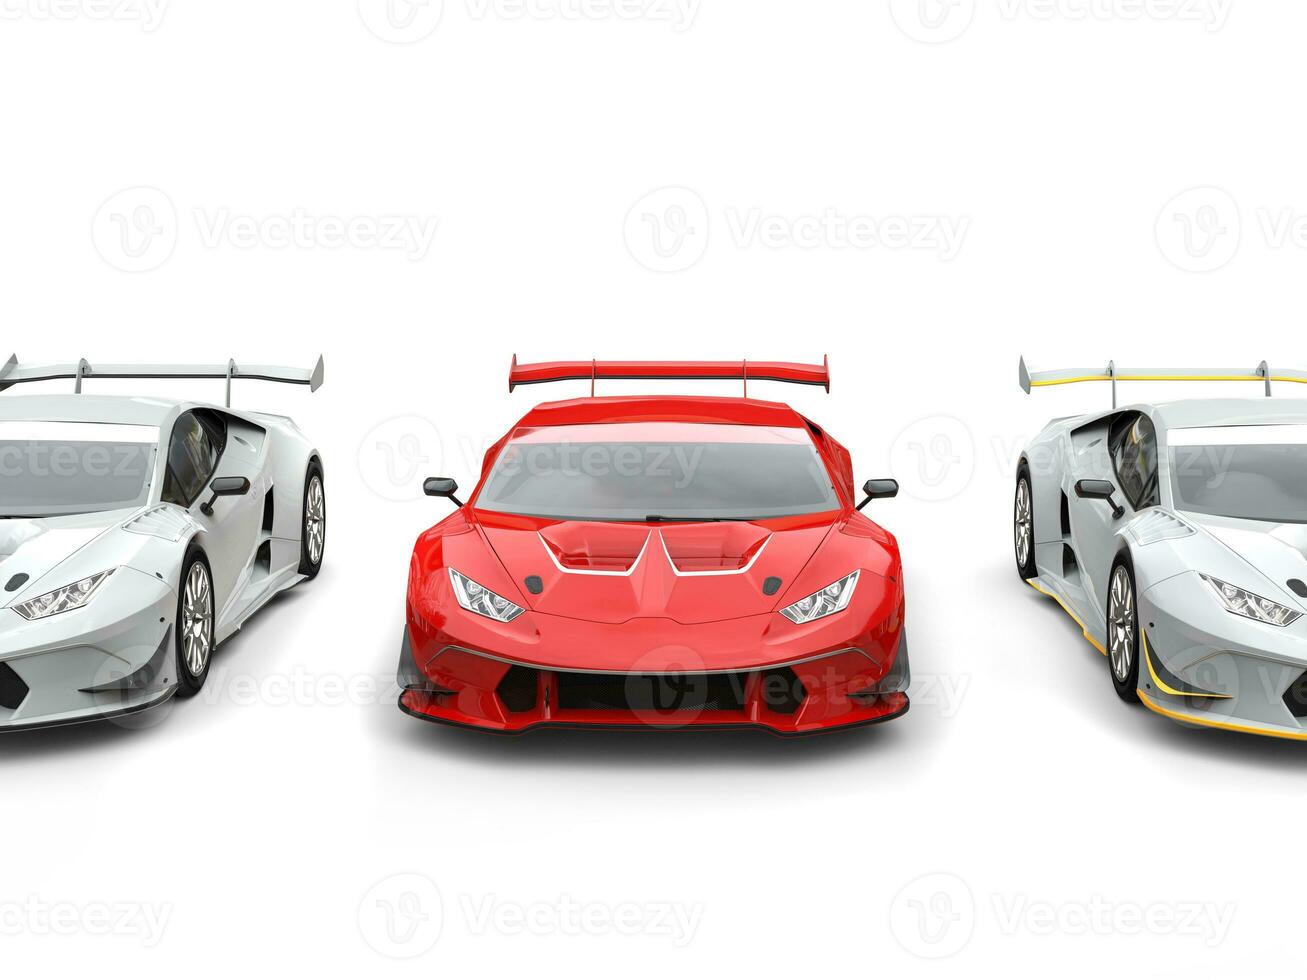 Bright red supercar with white sportscars on each side photo